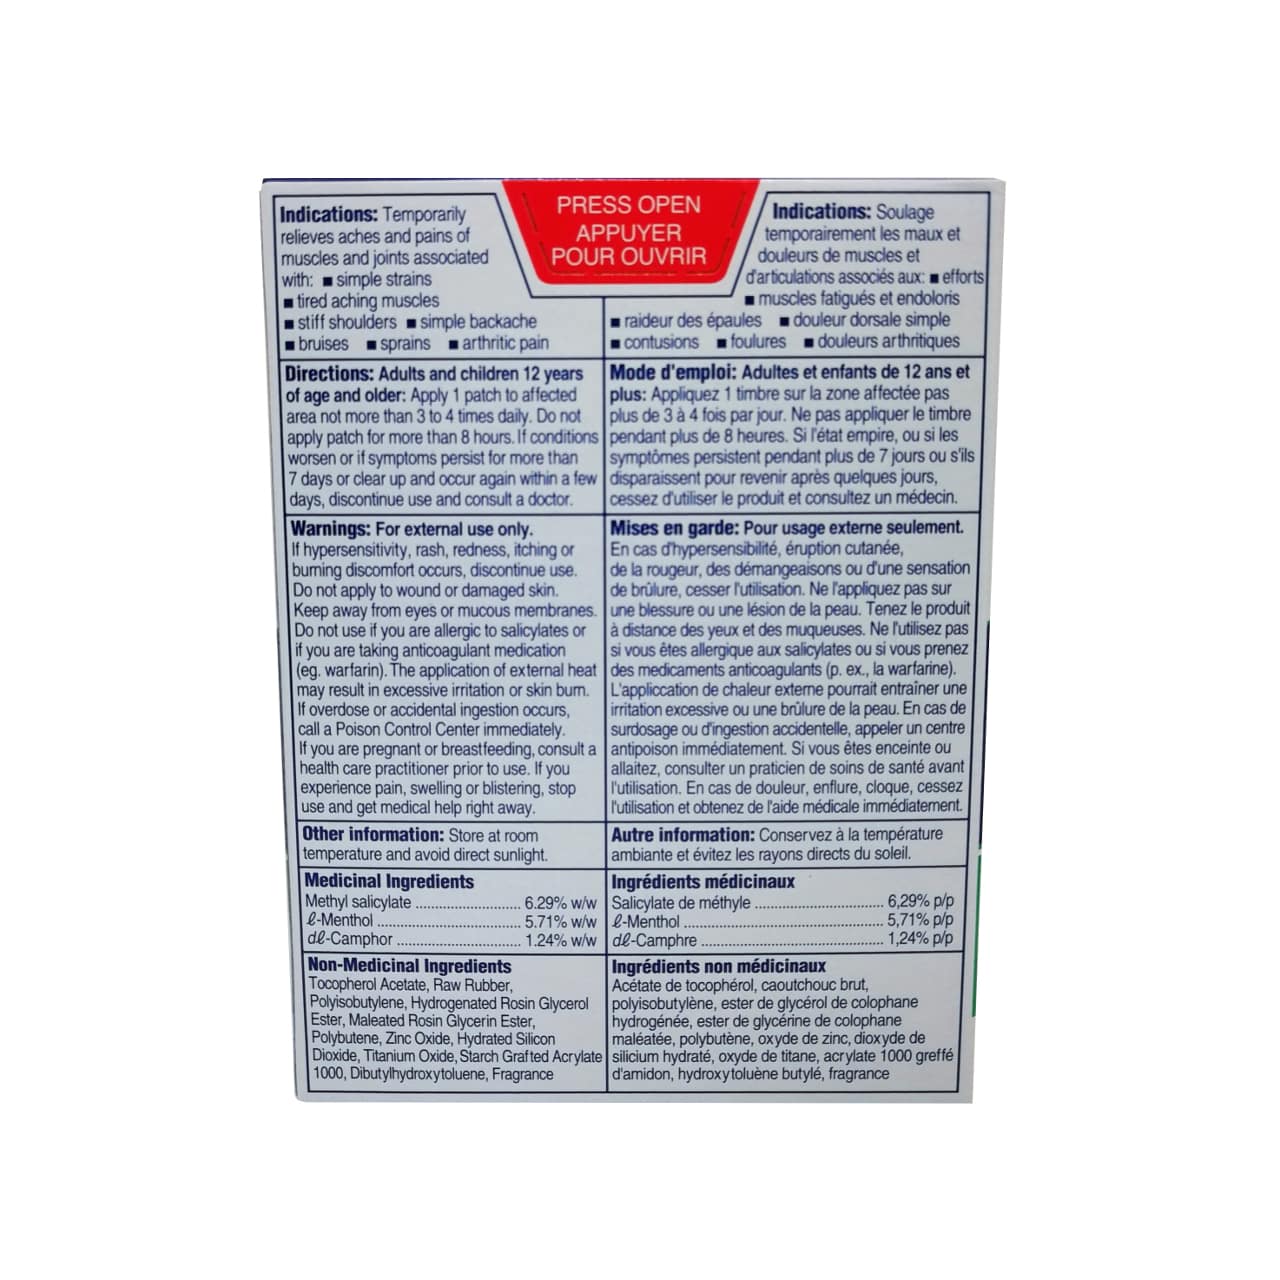 Indications, directions, warnings, ingredients for Salonpas Pain Relief Patch